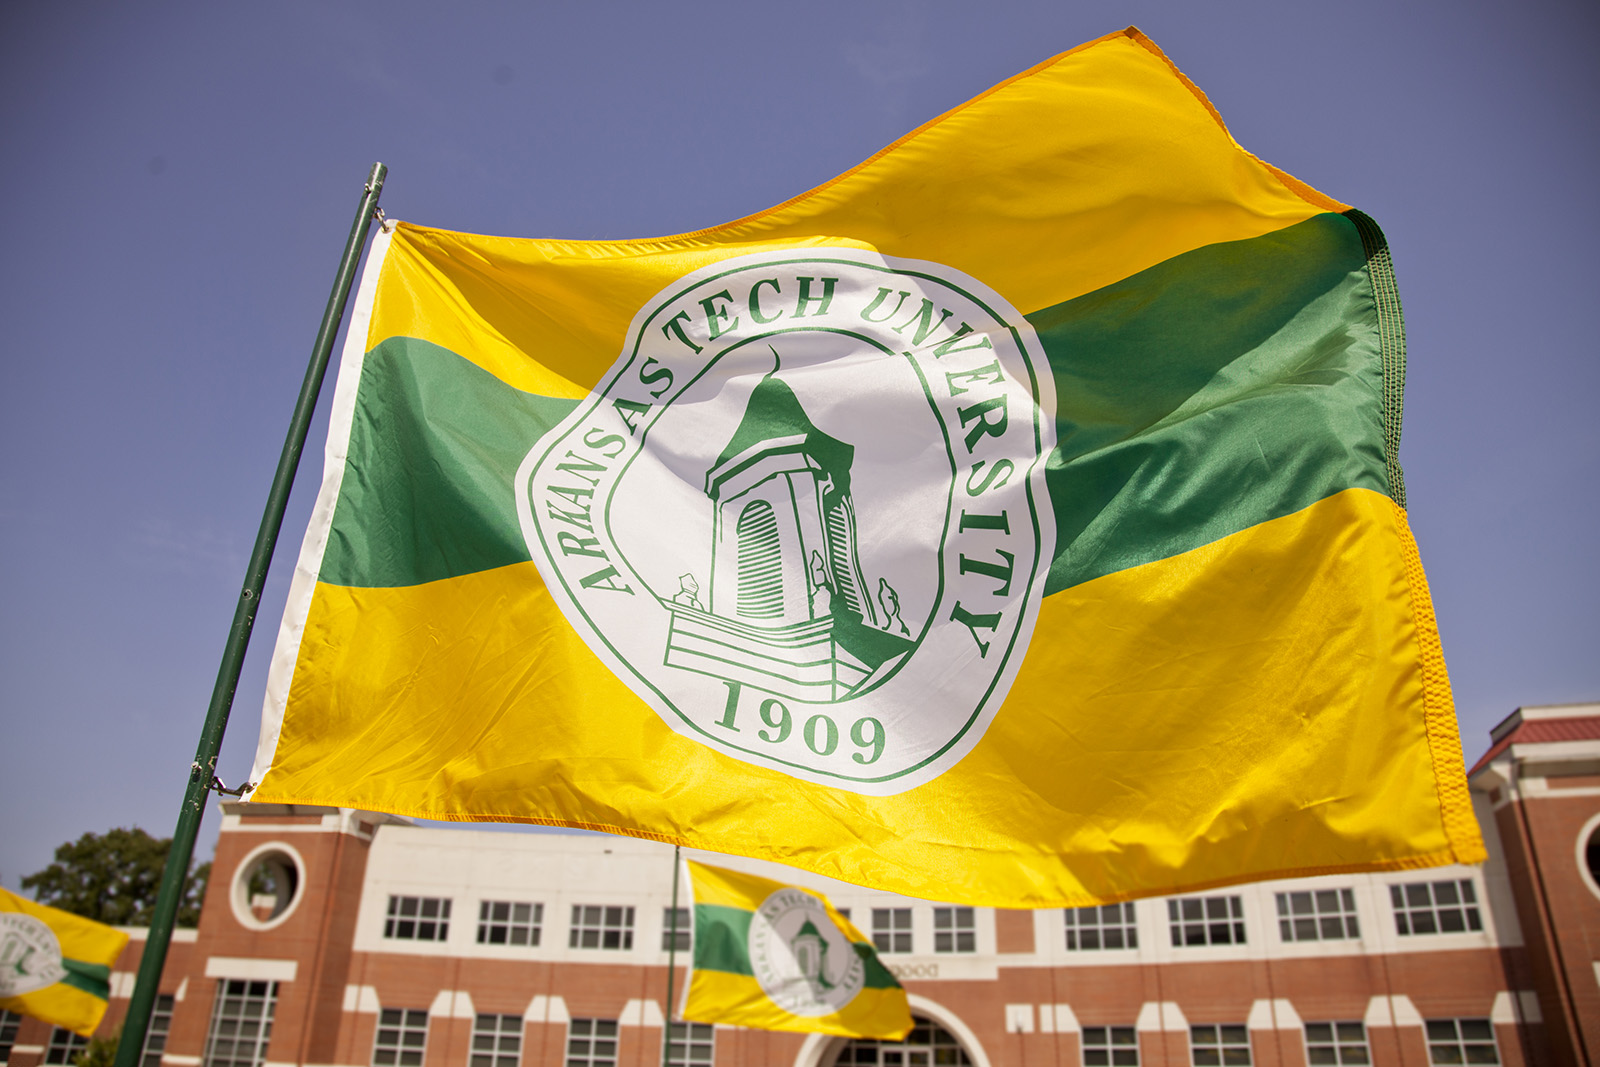 The Arkansas Tech University flag blowing in the wind